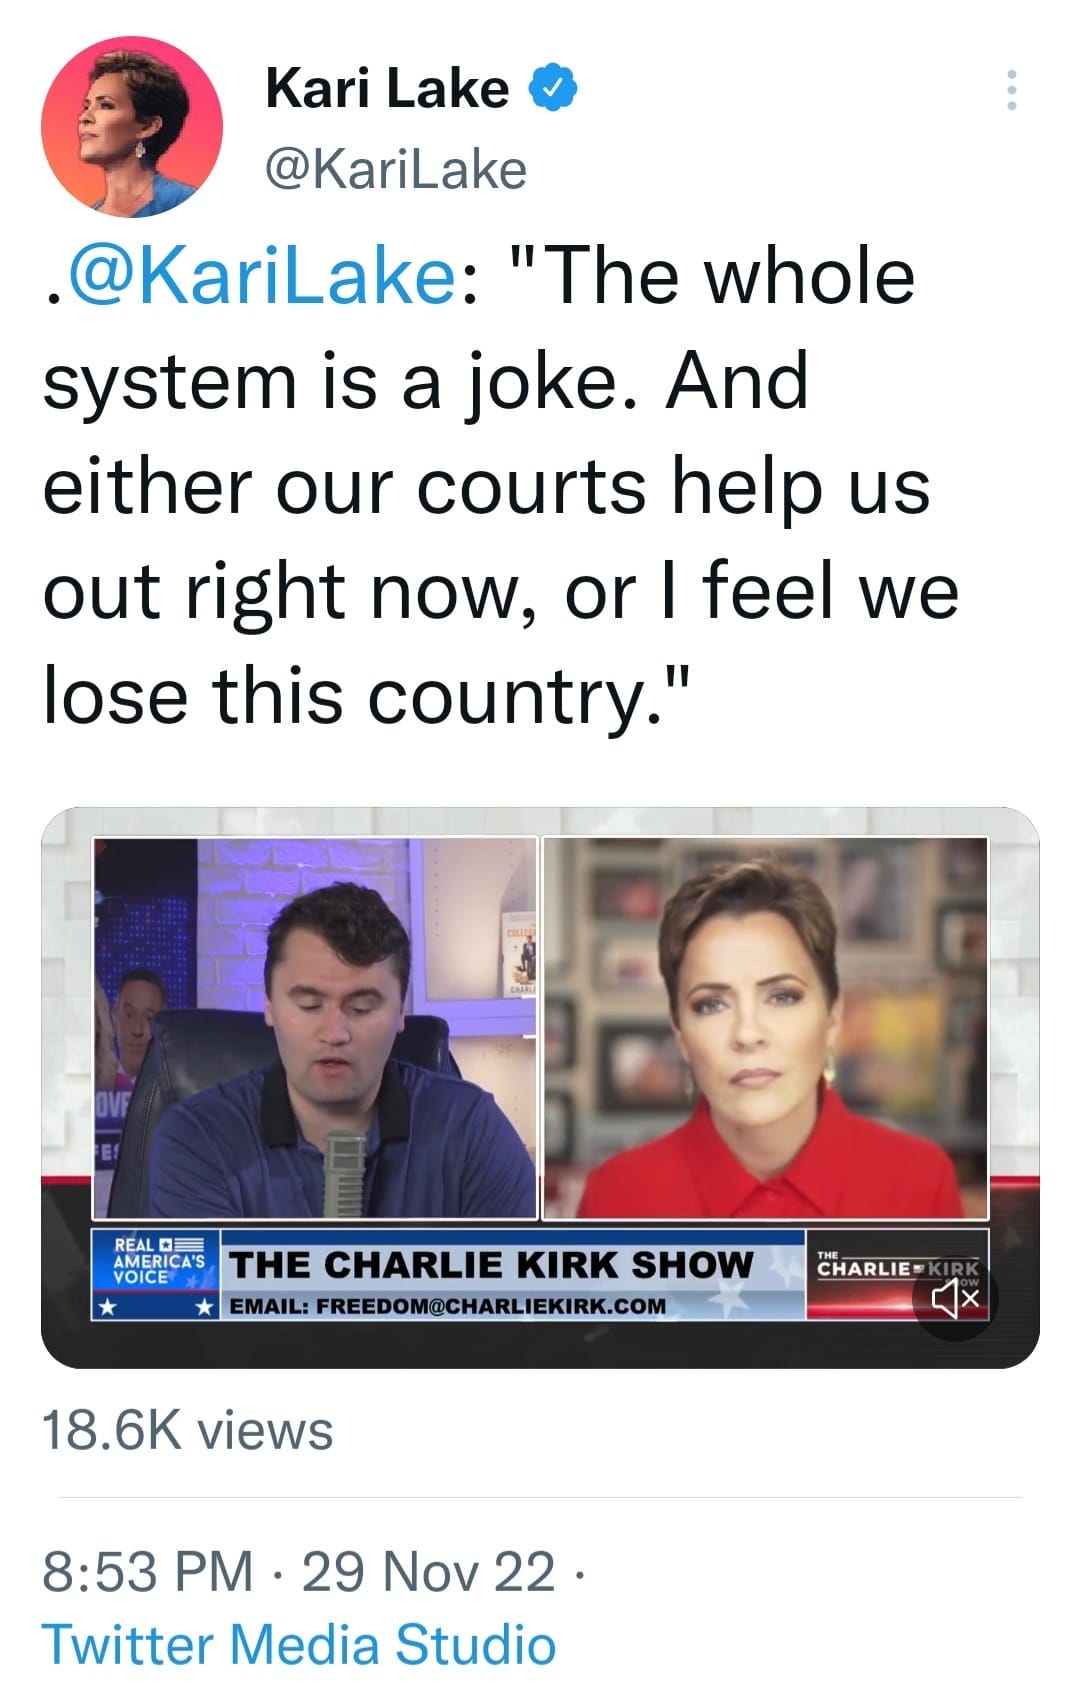 May be an image of 3 people and text that says 'Kari Lake @KariLake @KariLake: "The whole system is a joke. And either our courts help us out right now, or I feel we lose this country." AMERICA'S THE CHARLIE KIRK SHOW EMAIL: FREEDOM@CHARLIEKIRK.COM CHARLIE 18.6K 18. views 8:53 PM 29 Nov 22 Twitter Media Studio'